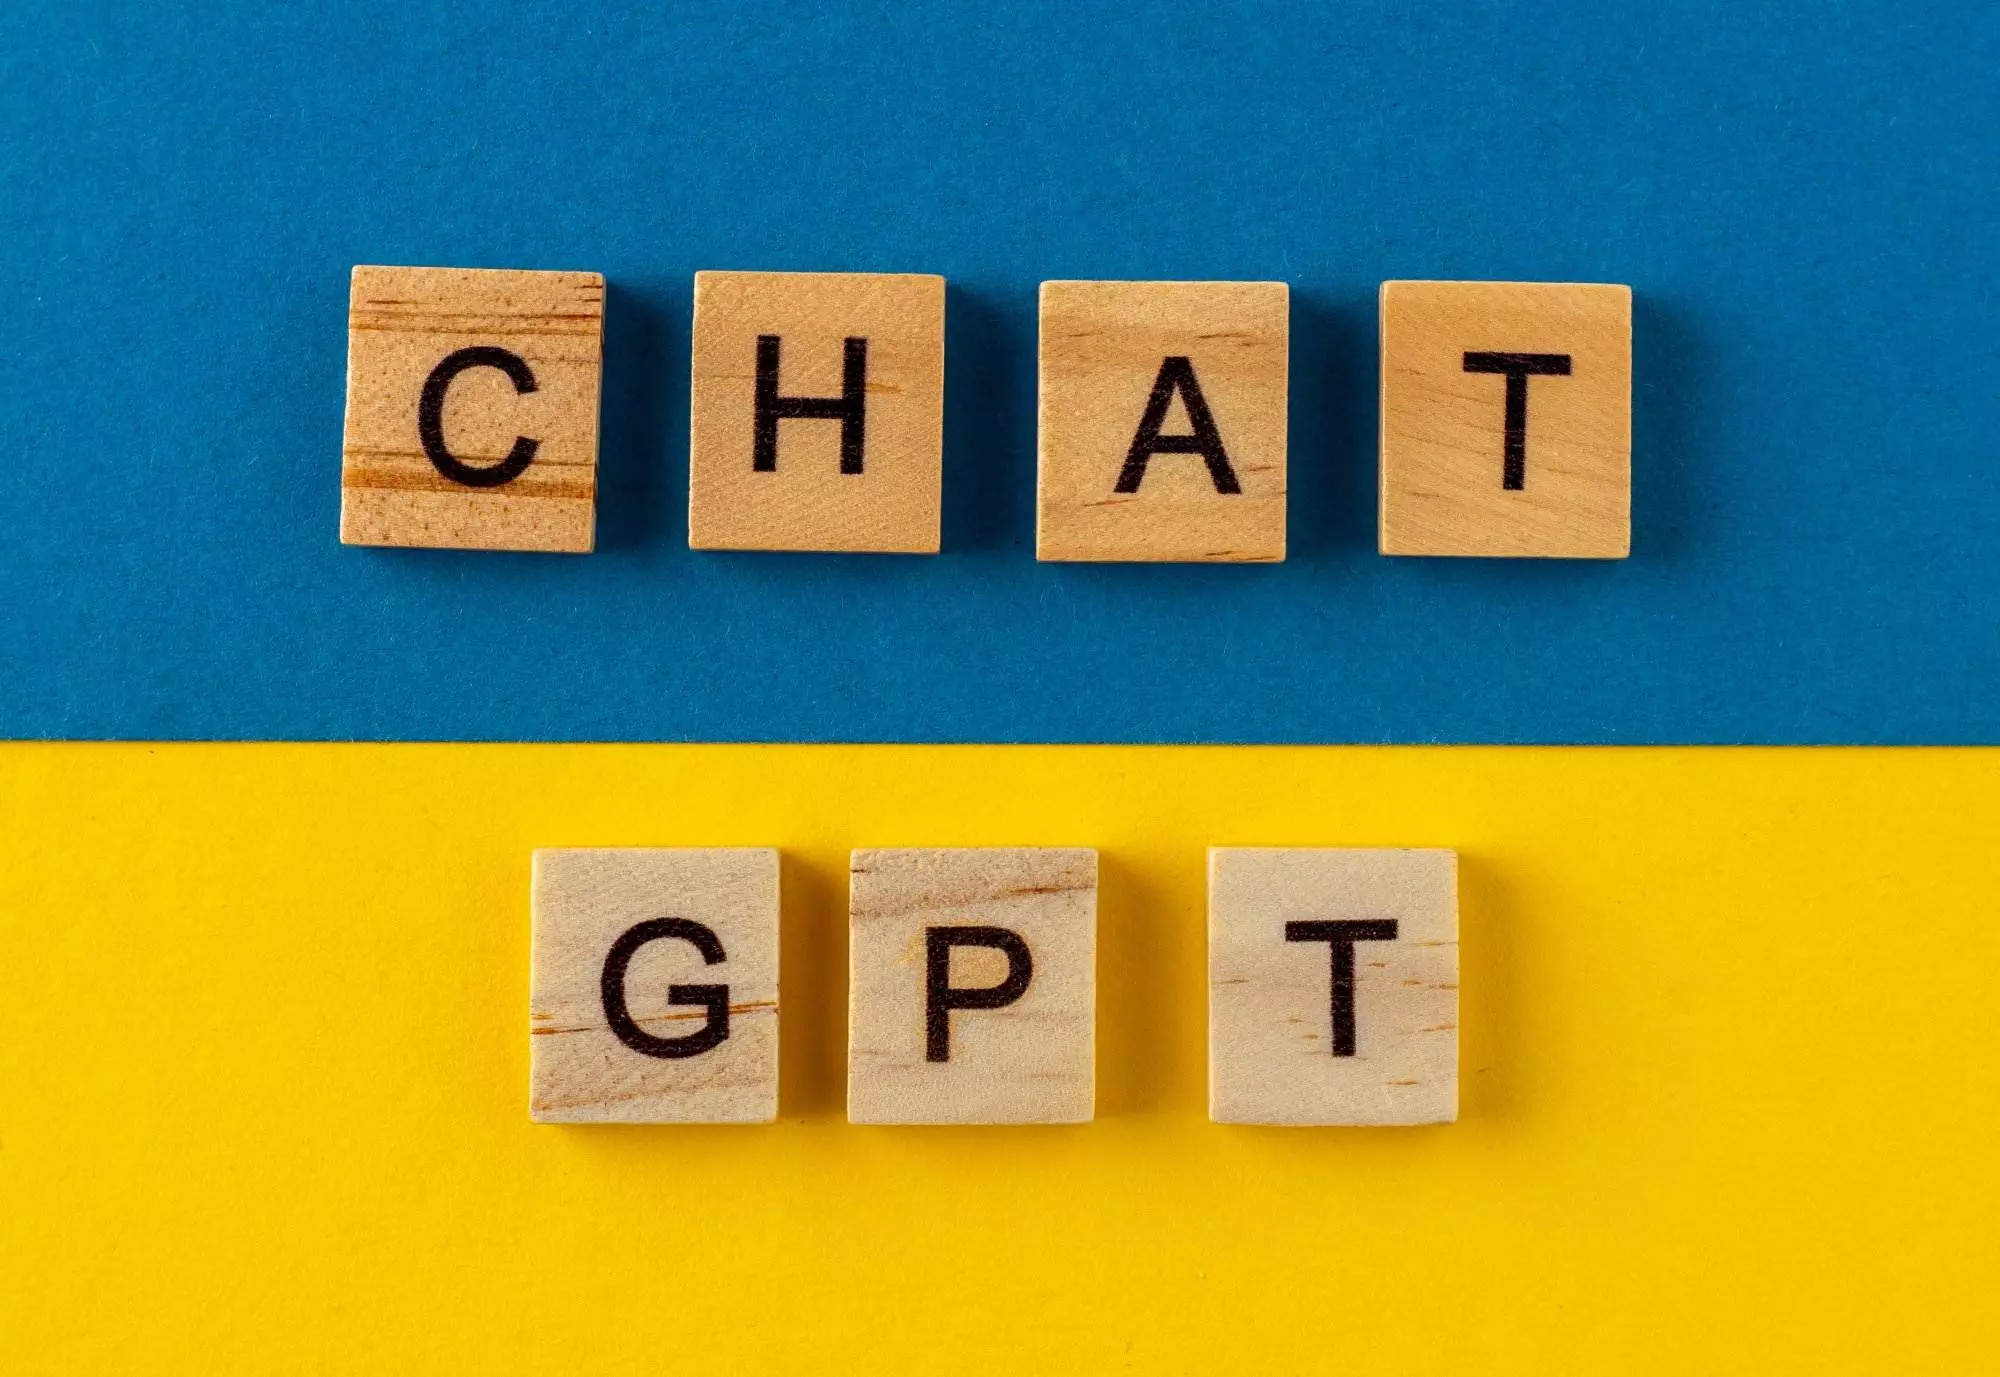 ChatGPT background. Words in wooden letters. Chat with AI or Artificial Intelligence by OpenAI.